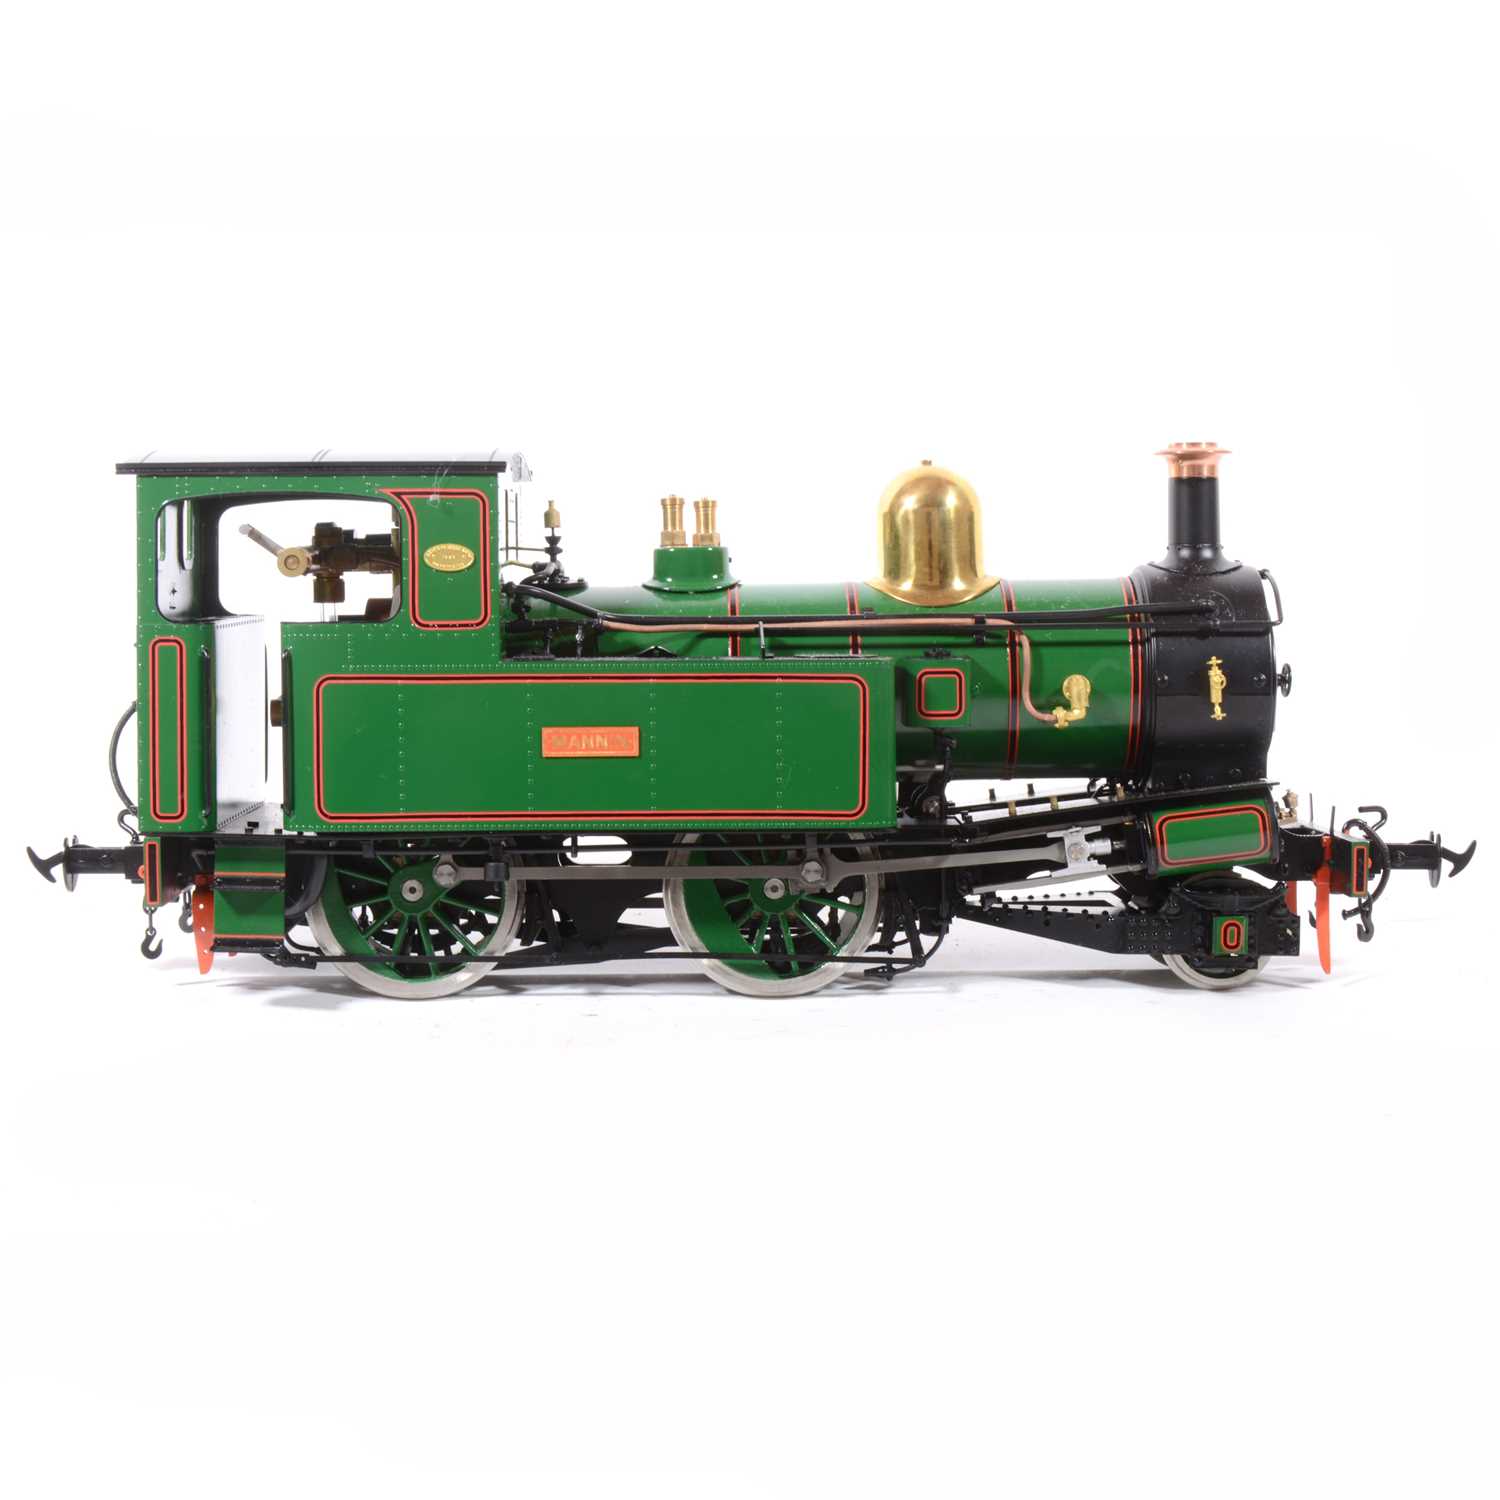 Lot 26 - Accucraft live steam, gauge 1 / G scale, 45mm locomotive, Beaver Peacock Isle of Man 'Mannin' 2-4-0T, green, with instructions, accessories and box.